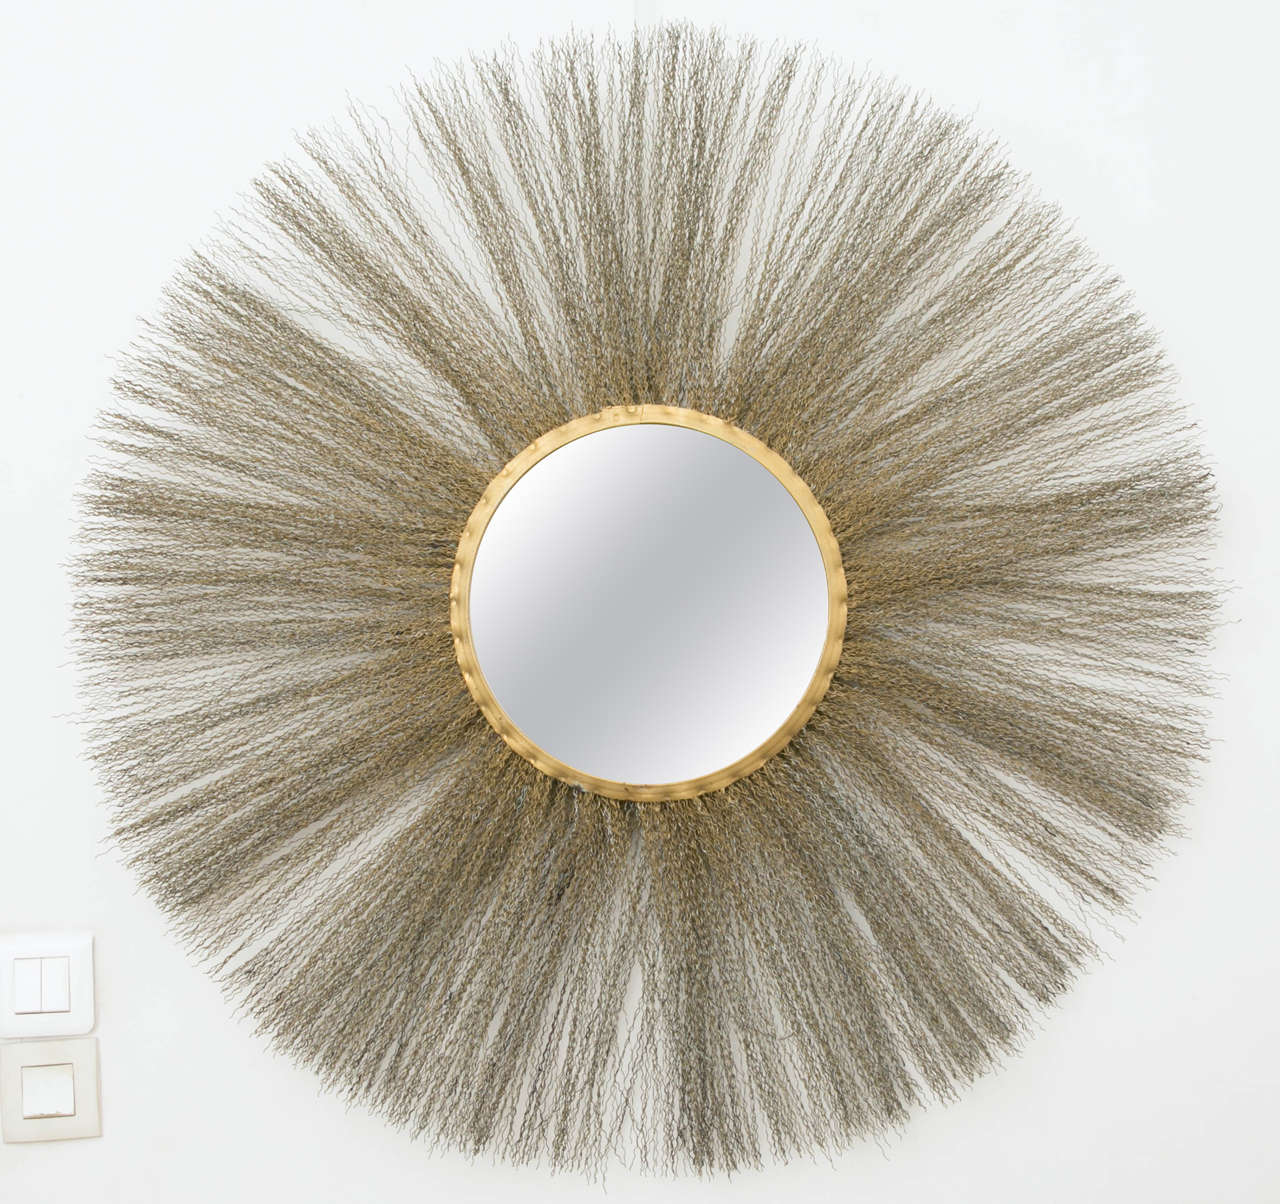 Astonishing circular gilt brass mirror, Italy, 1950.
Frame surrounded with many zig-zag brass threads.
Mirror own frame diam.12 inches . Hair length 1 ft. 